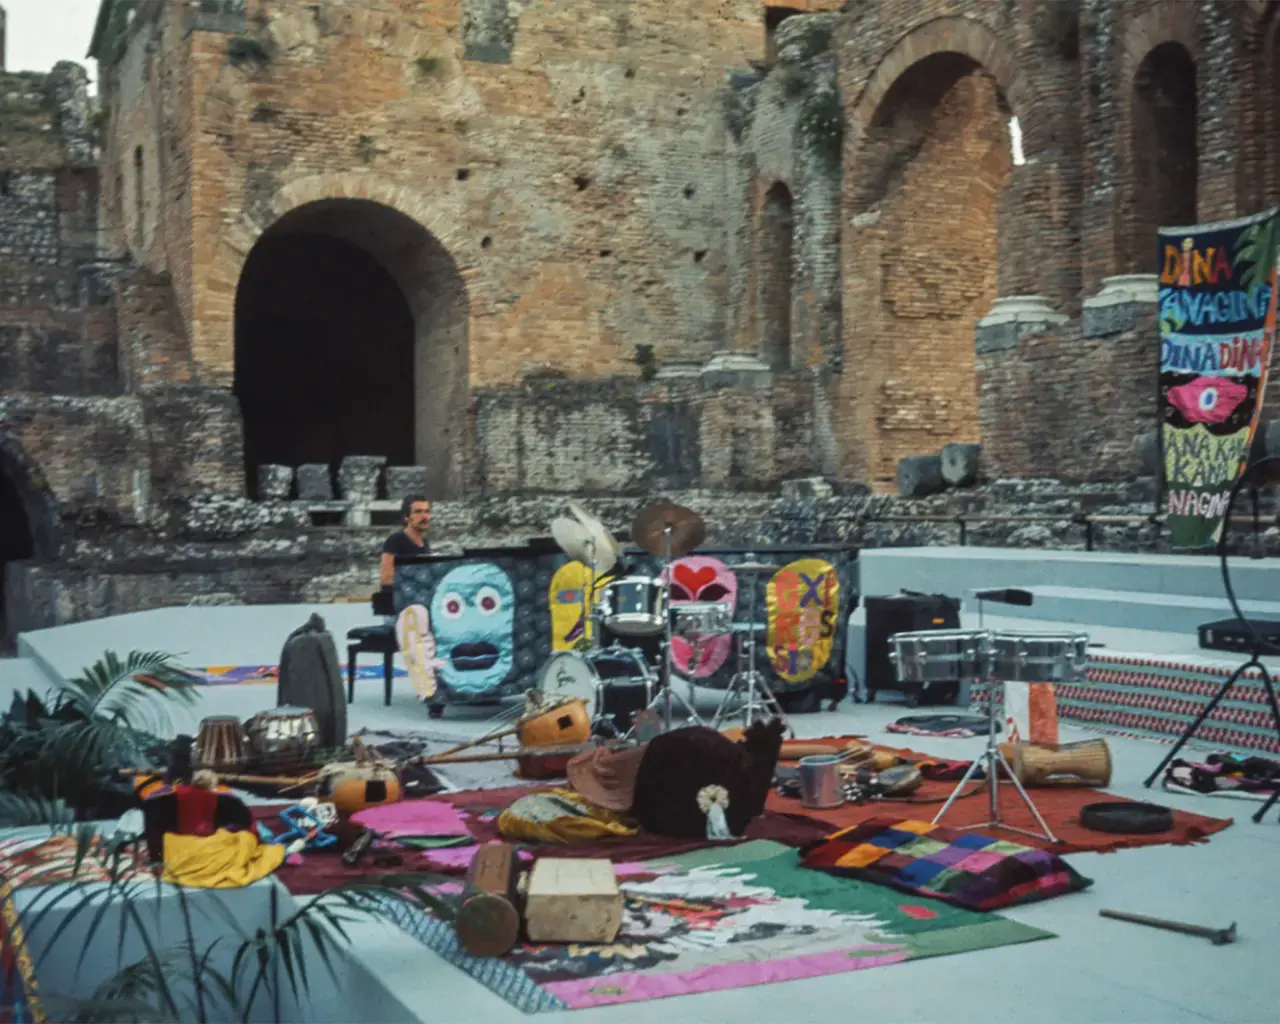 Moki Cherry, set created for a performance of the Organic Music Society, a troupe of artists convened by Don and Moki Cherry, mid-70s, Italy. Photo courtesy of Ars Nova Workshop.